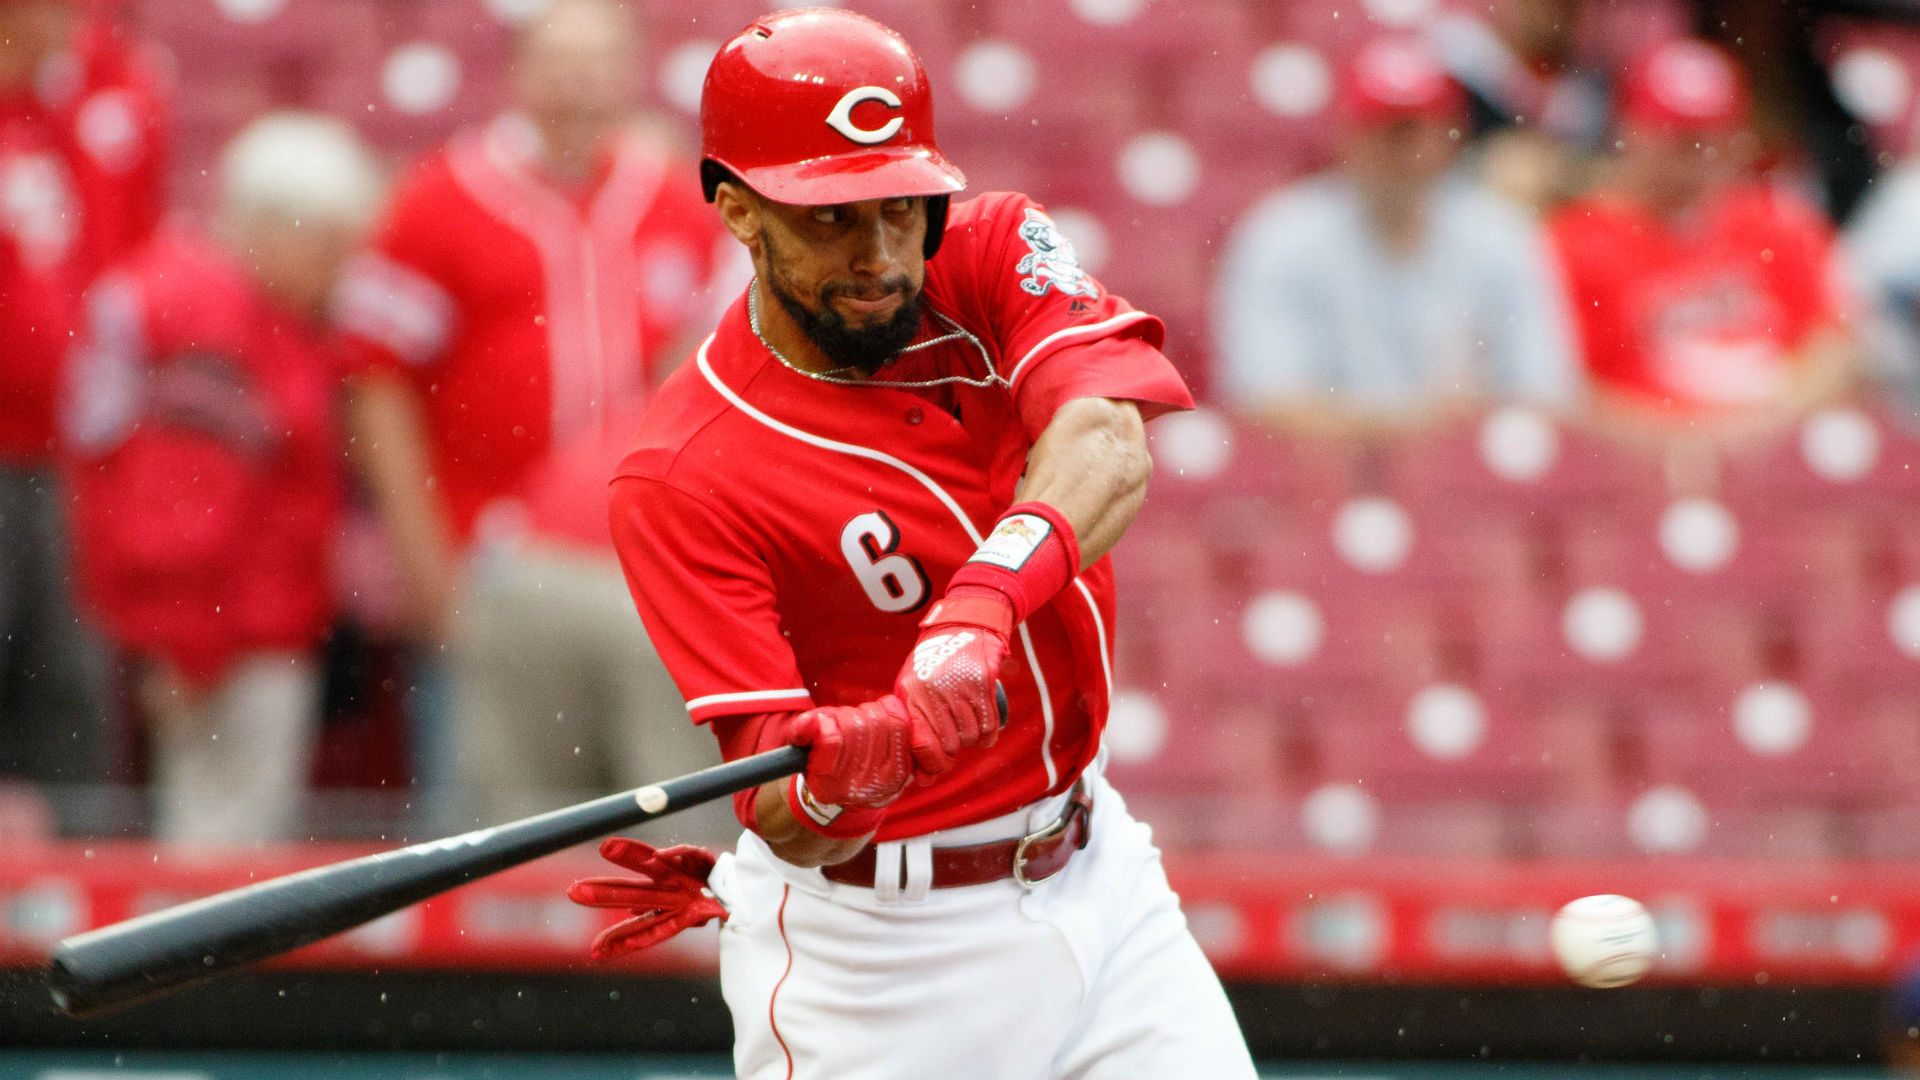 Hamilton, a second-round draft pick of the Reds in 2009, became a free agent last week after he was non-tendered by Cincinnati.